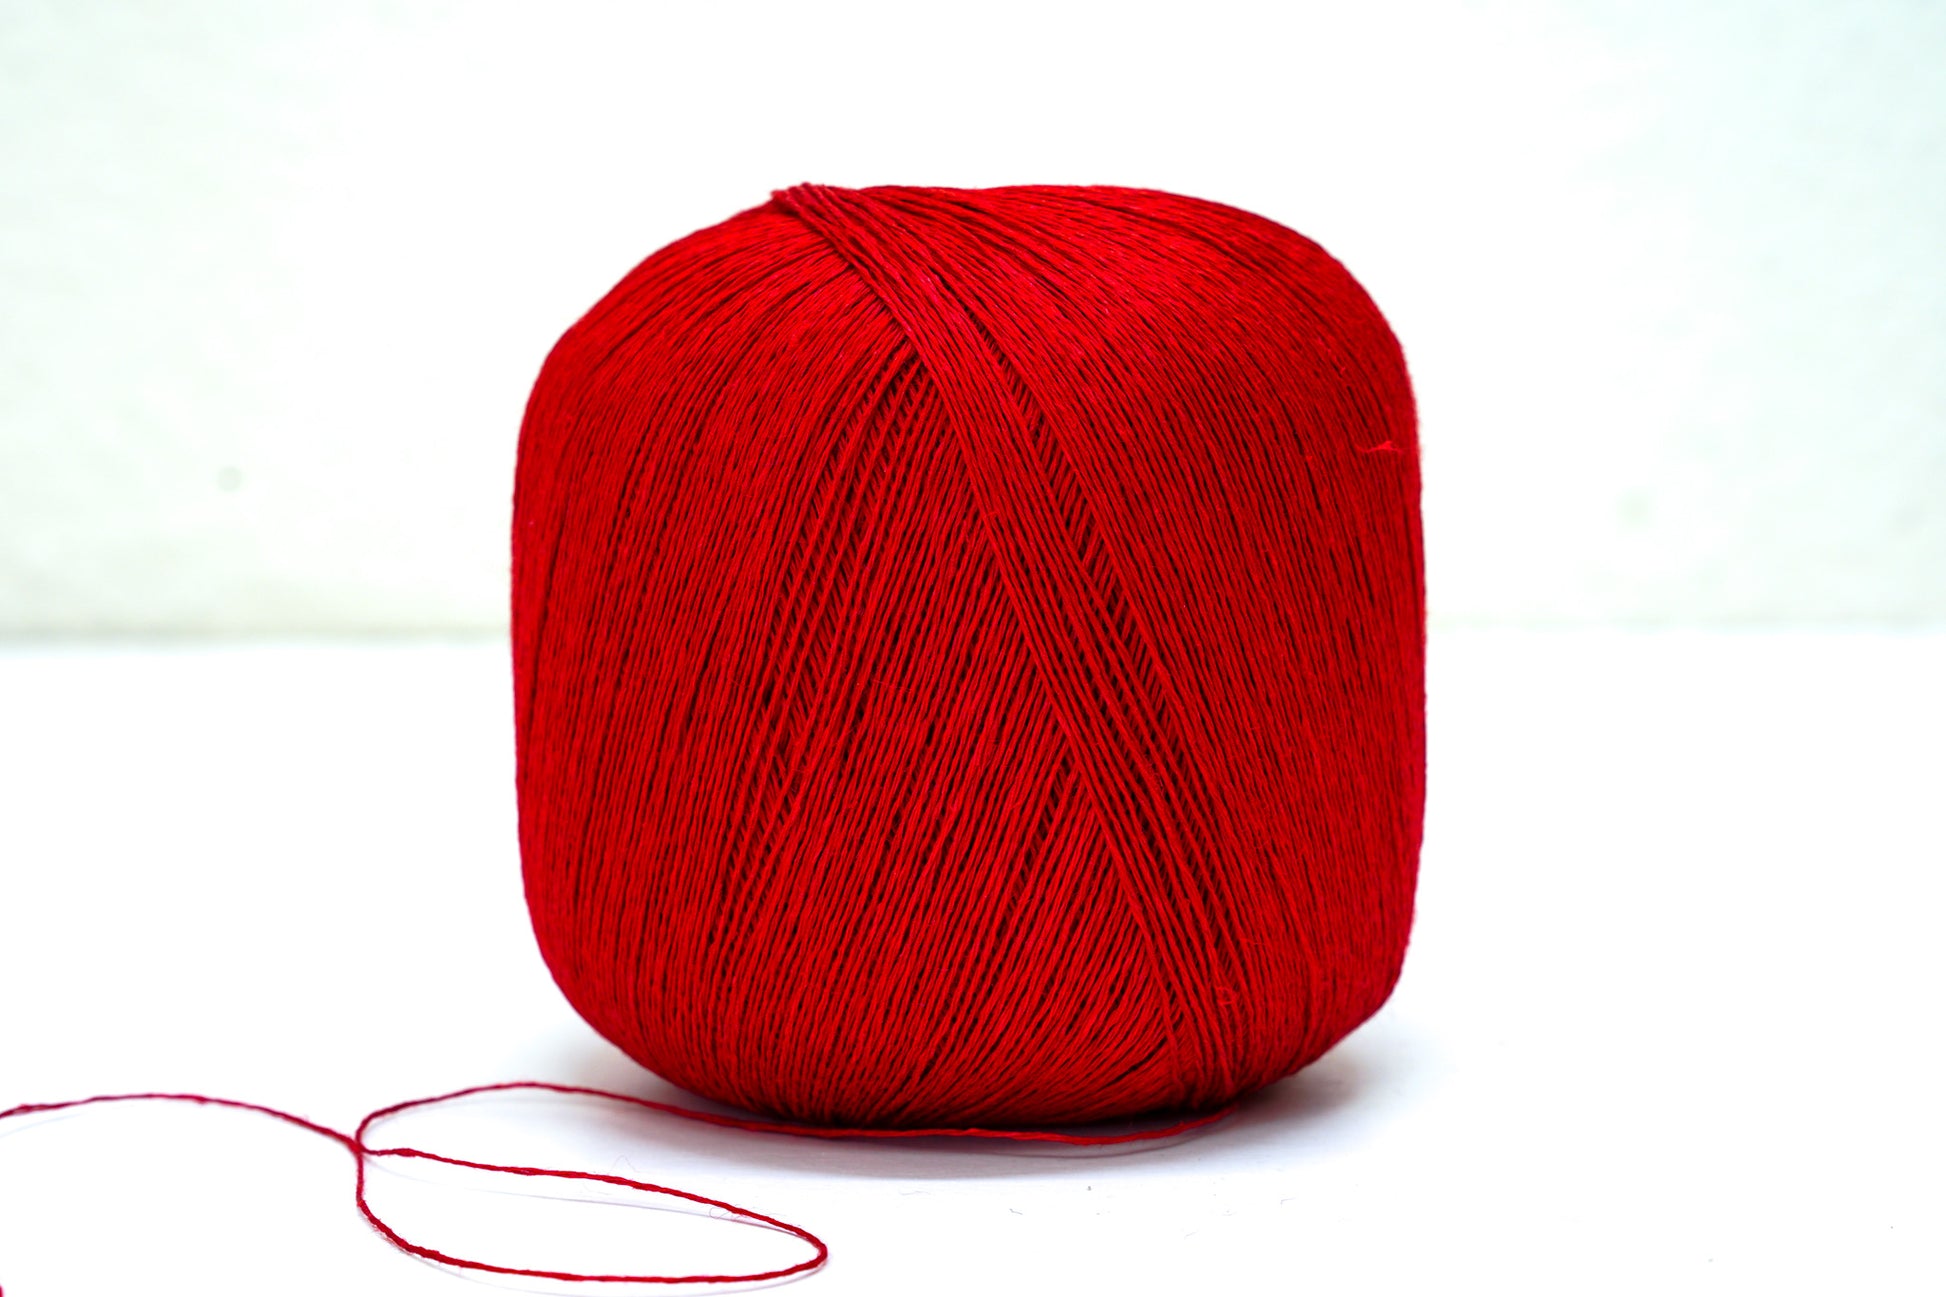 100% linen yarn in bright red color